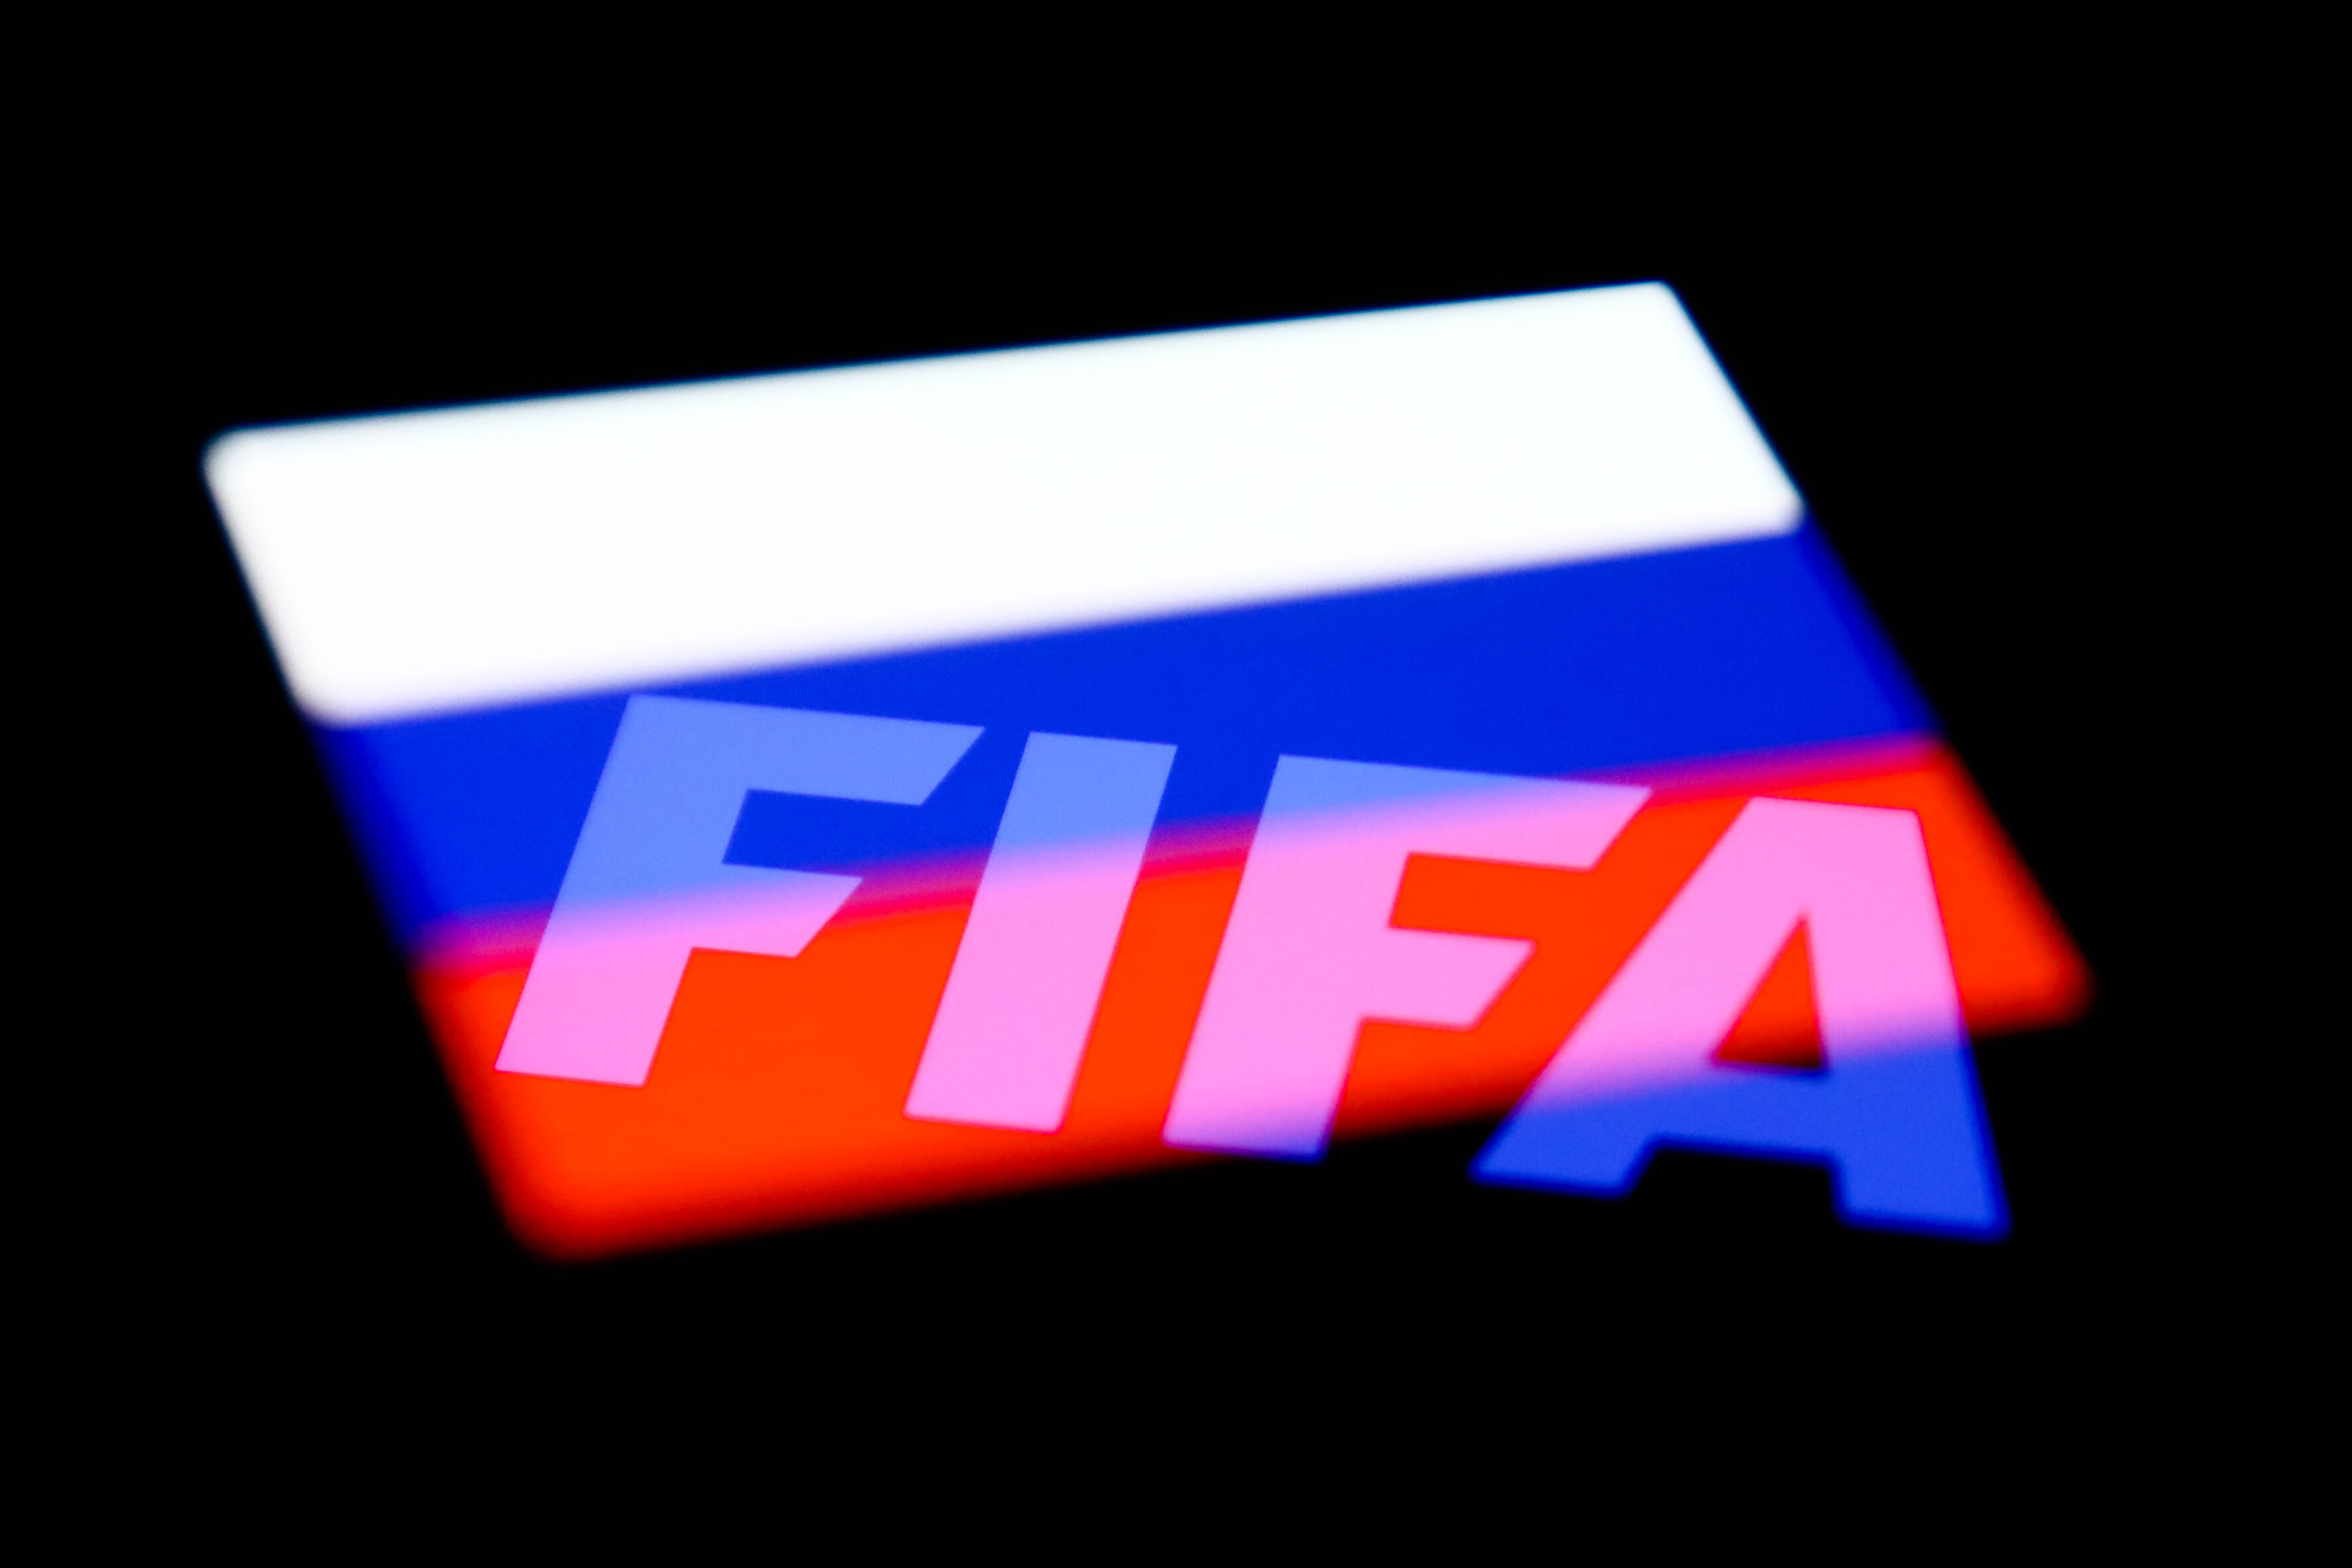 FIFA's logo and the Russian flag are seen displayed on a phone screen